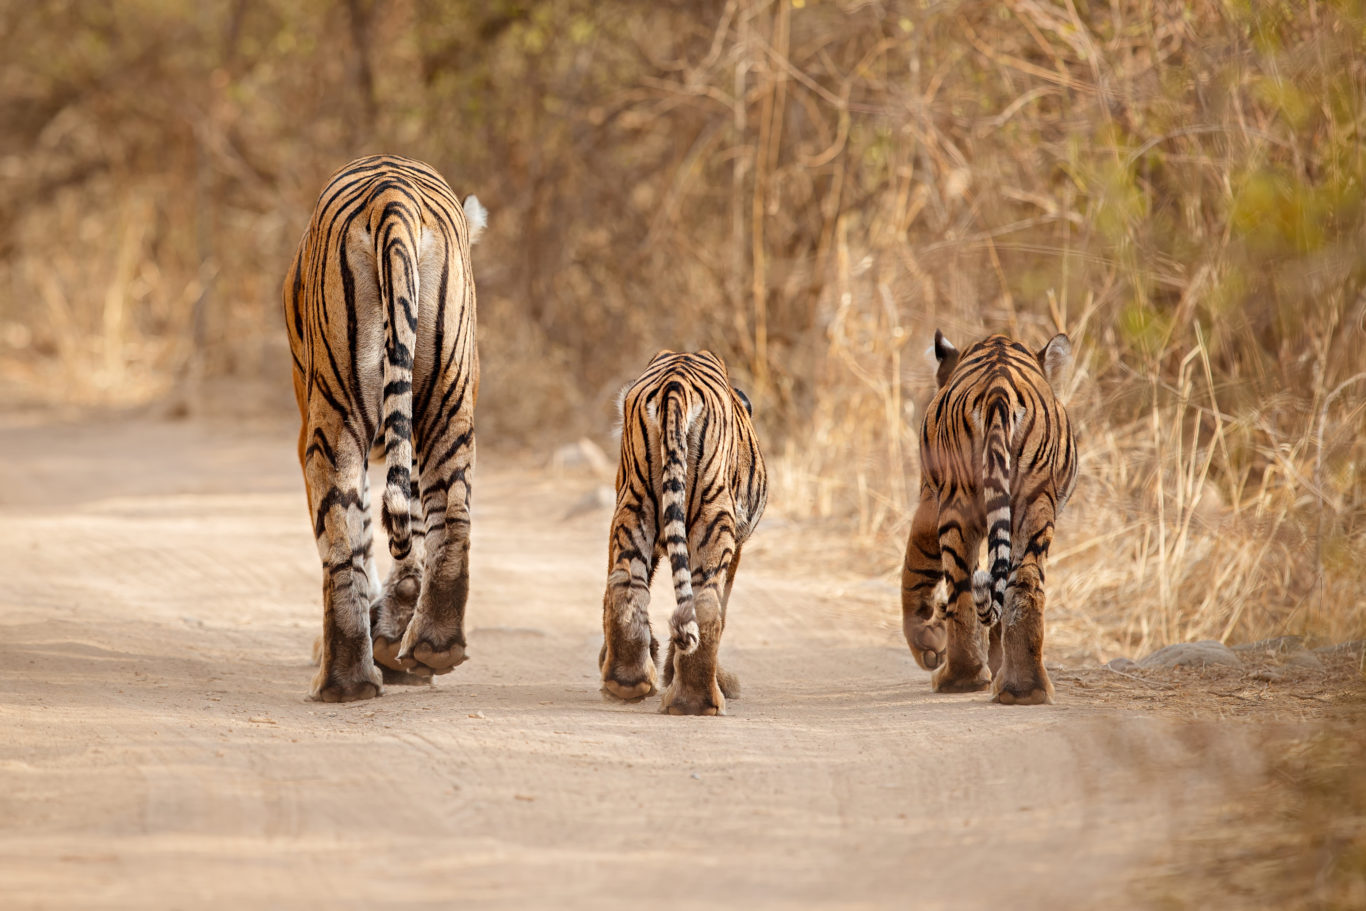 Tigers in the wild (Photocech/Getty/PA)